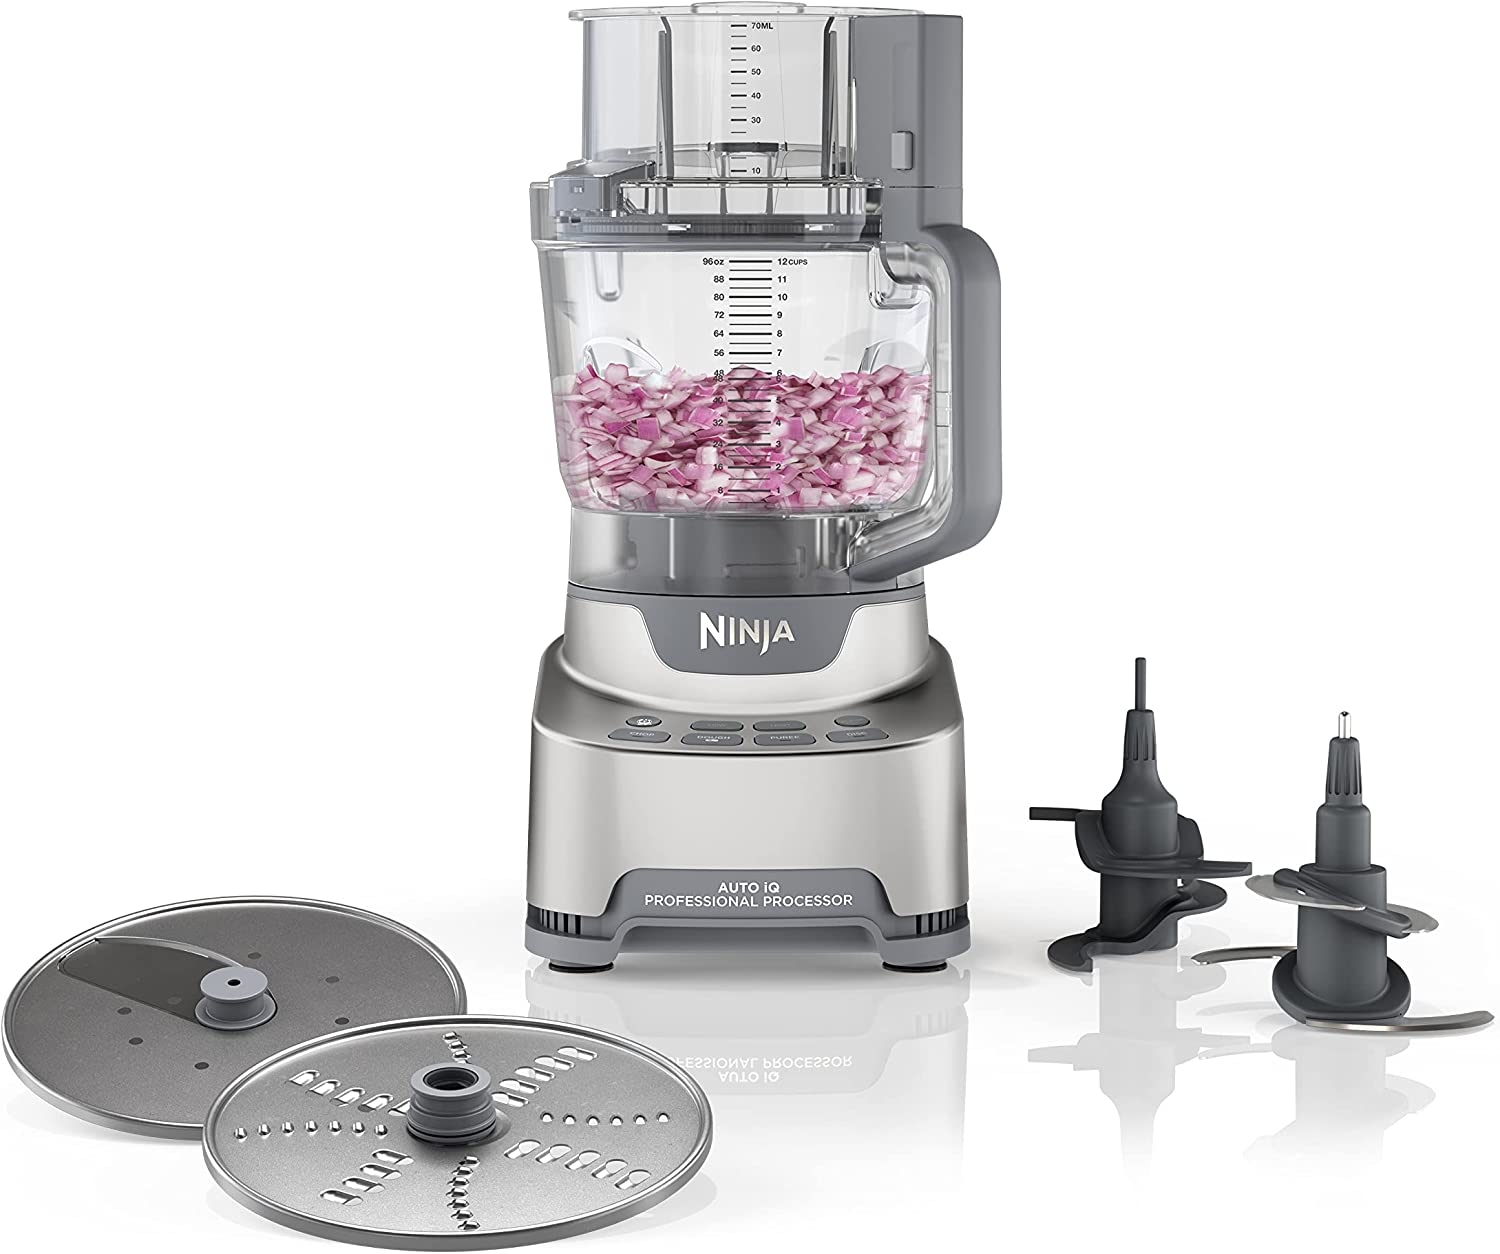 Ninja BN601 Professional Plus Food Processor, 1000 Peak Watts, 4 Functions for Chopping, Slicing, Purees & Dough with 9-Cup